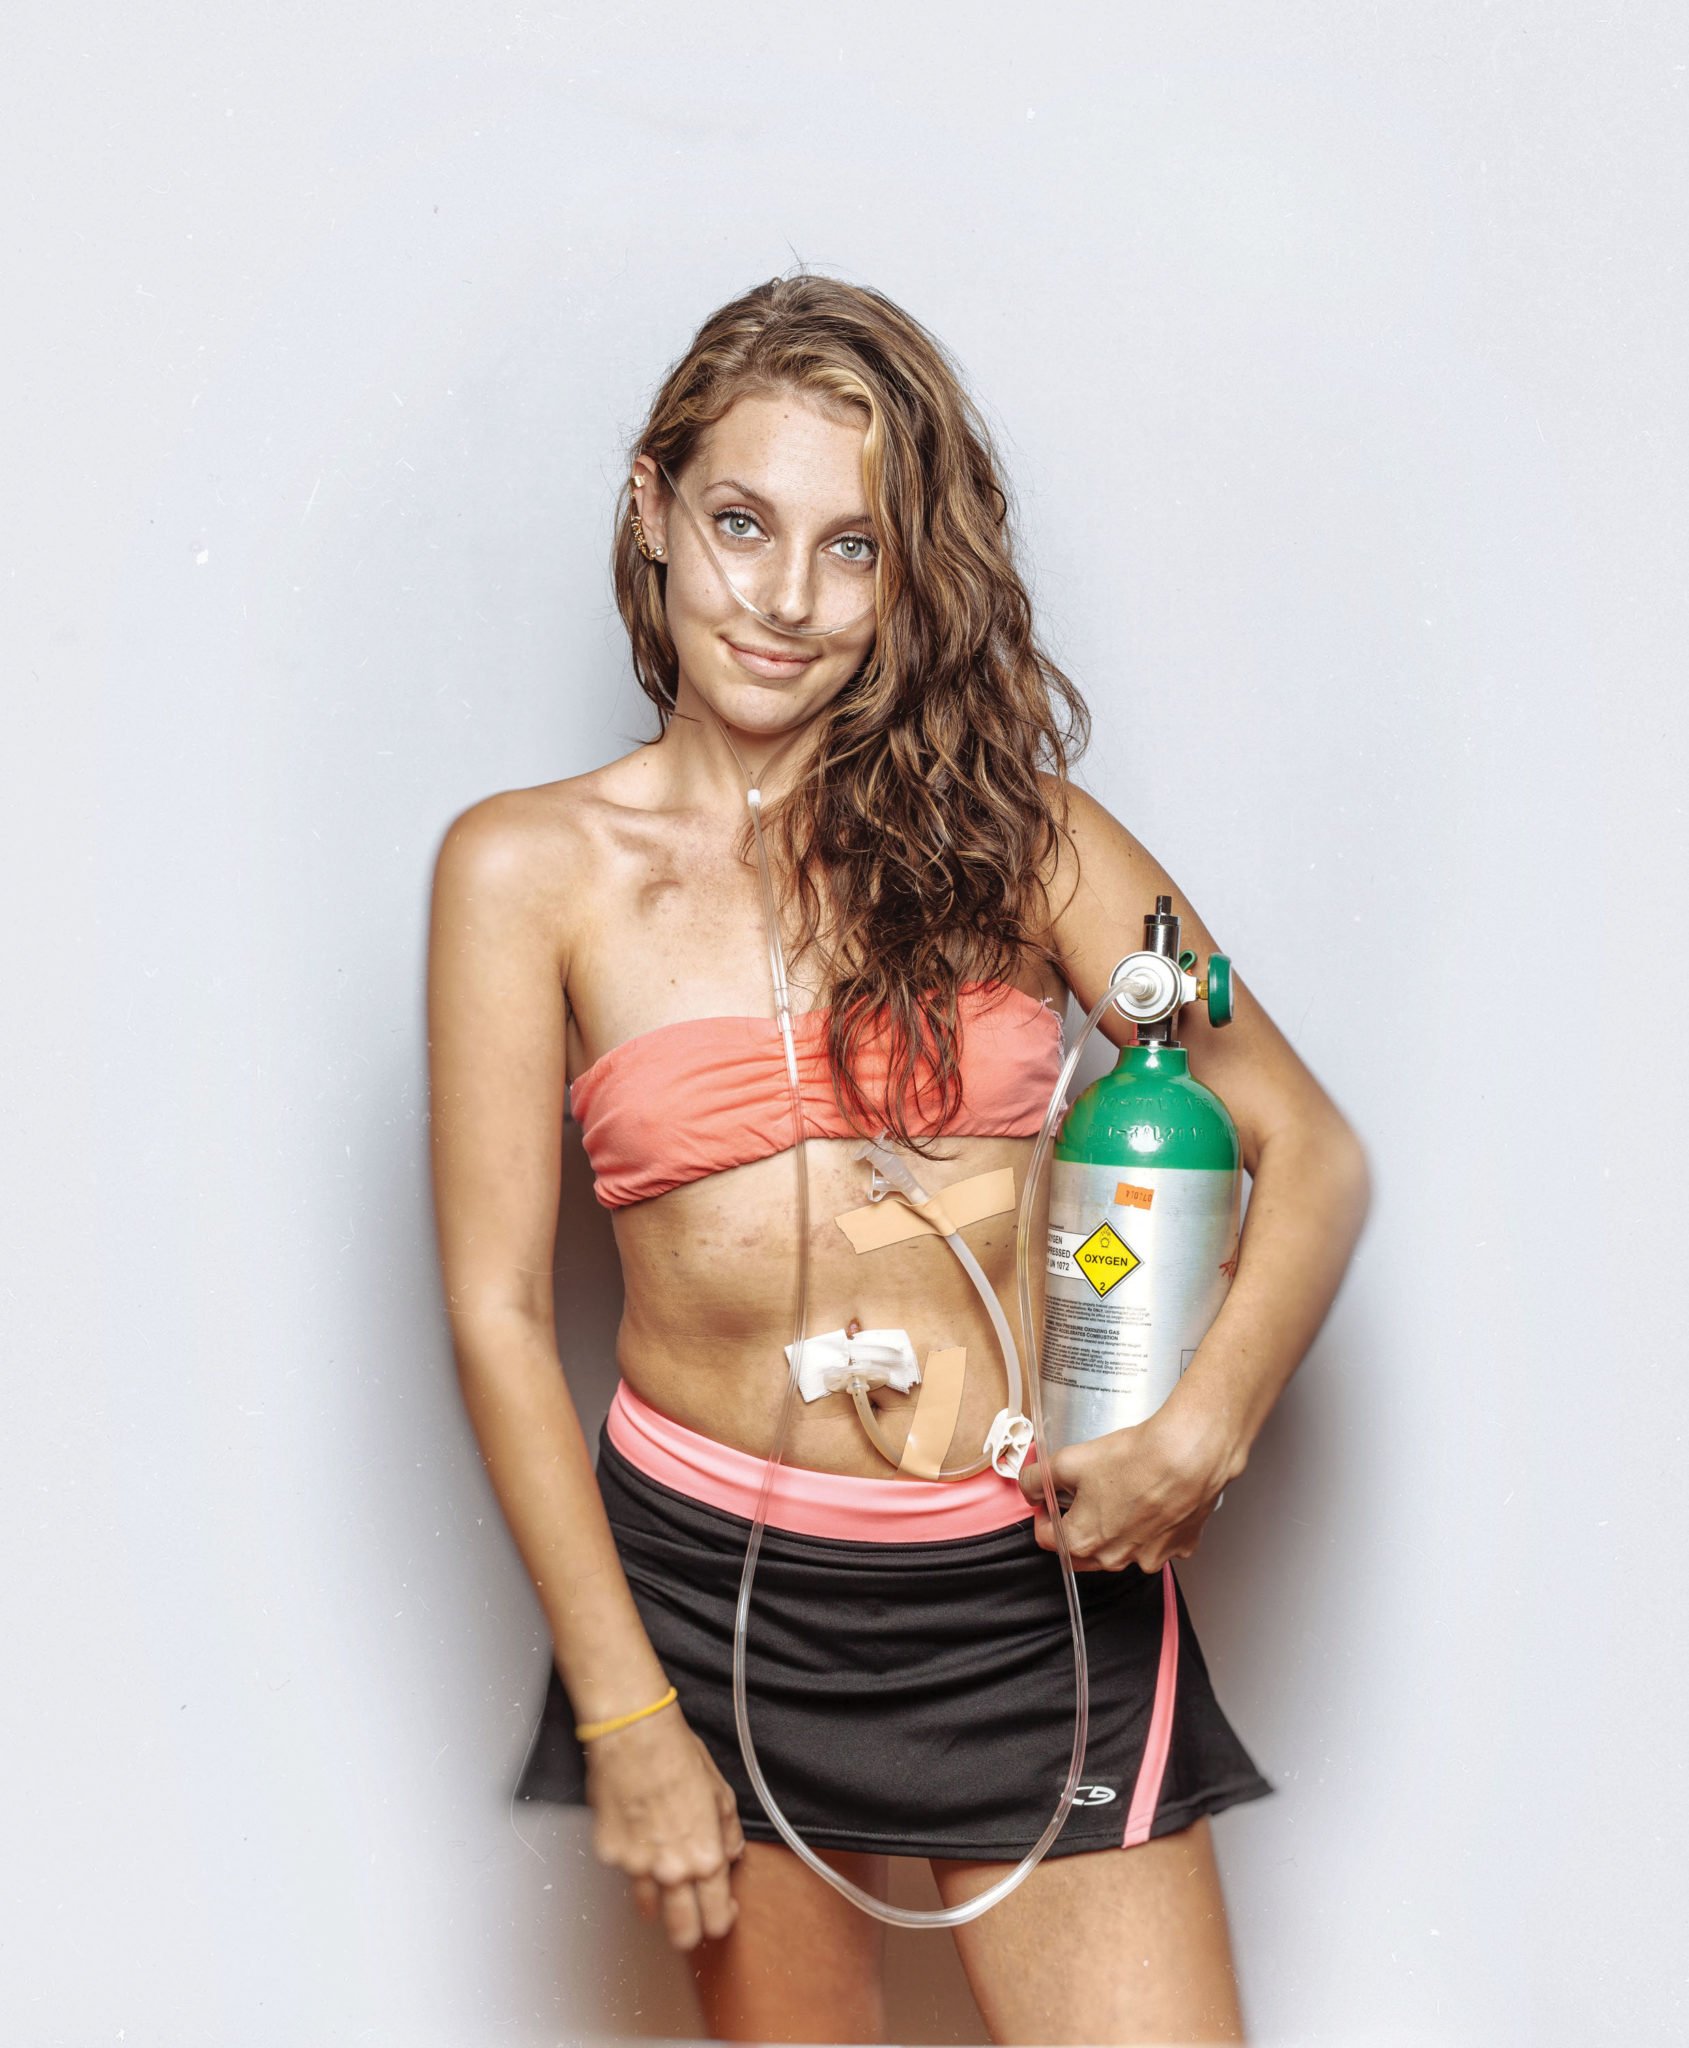 Salty Girls Features Portraits of Women Fighting Cystic Fibrosis